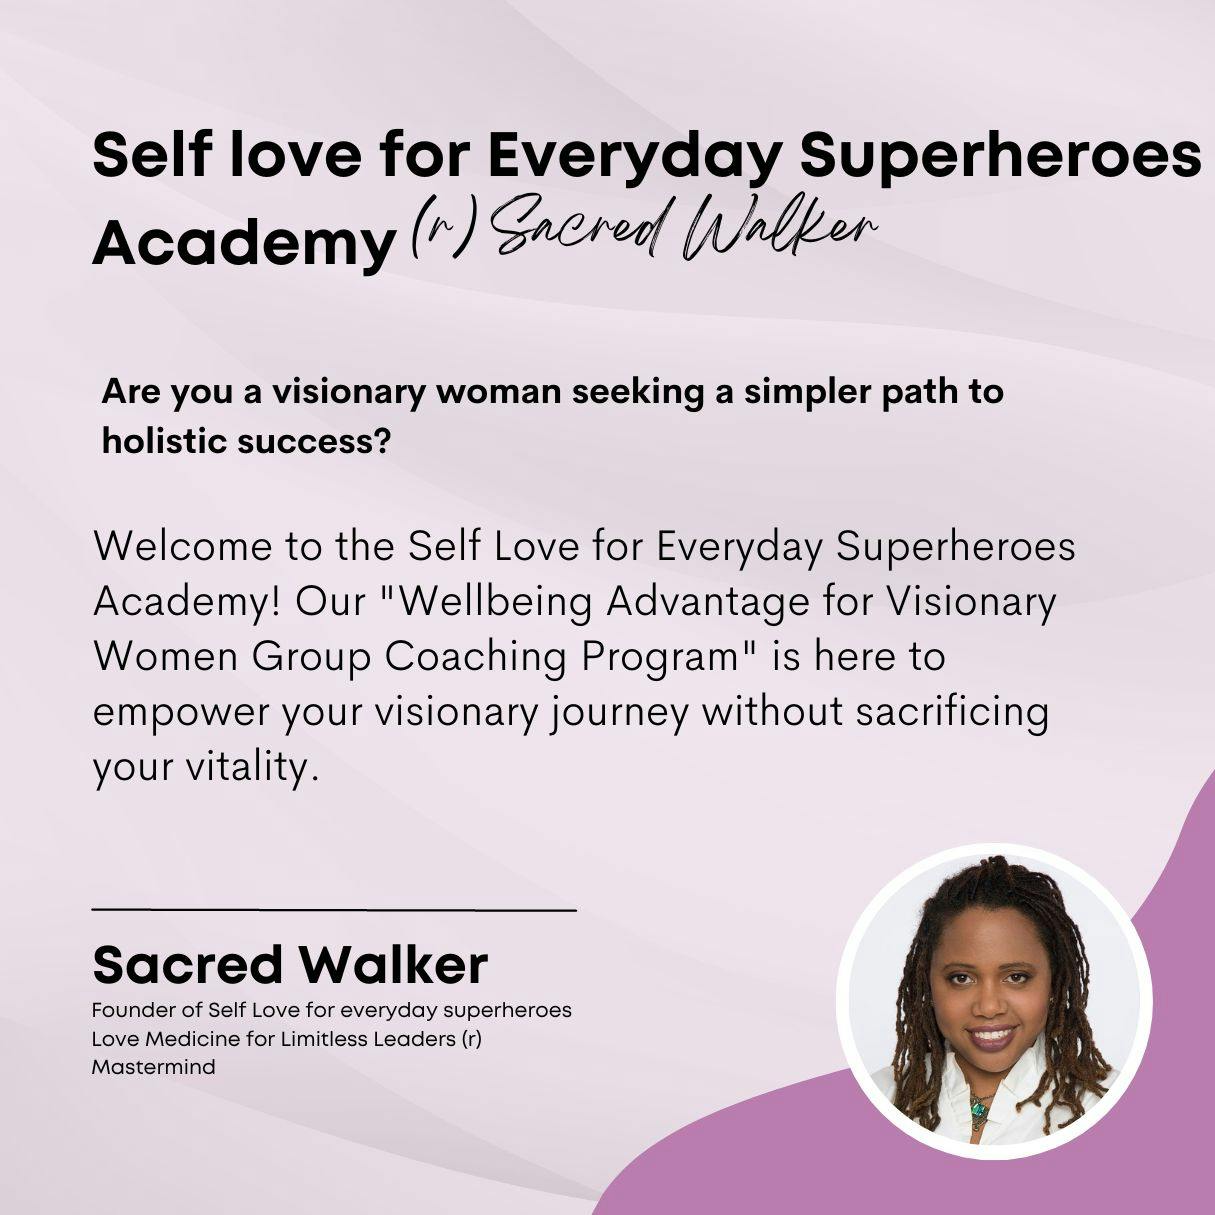 🌟 Join our Super Speak CHALLENGE today! 🗣️✨

Unleash your inner superstar! 💃 The Super Speak Challenge is an exclusive online group coaching series designed specifically for executive women like you! 🌟

Join in this 21-day transformative experience with Sacred Walker and the visionary leaders of the Kuumba Health Institute to unleash the fearless leader within you and strengthen your public speaking skills to speak authentically with confidence. 🎙️💪

Ready to become #Limitless? Sign up today for your FREE INTRO session and let's redefine what it means to be a Limitless Leader! 🌟

🔗 selfloveforsuperheroes.com
#SuperSpeakChallenge #LimitlessLeadersChallenge #UnleashYourInnerSuperstar 💃🌟